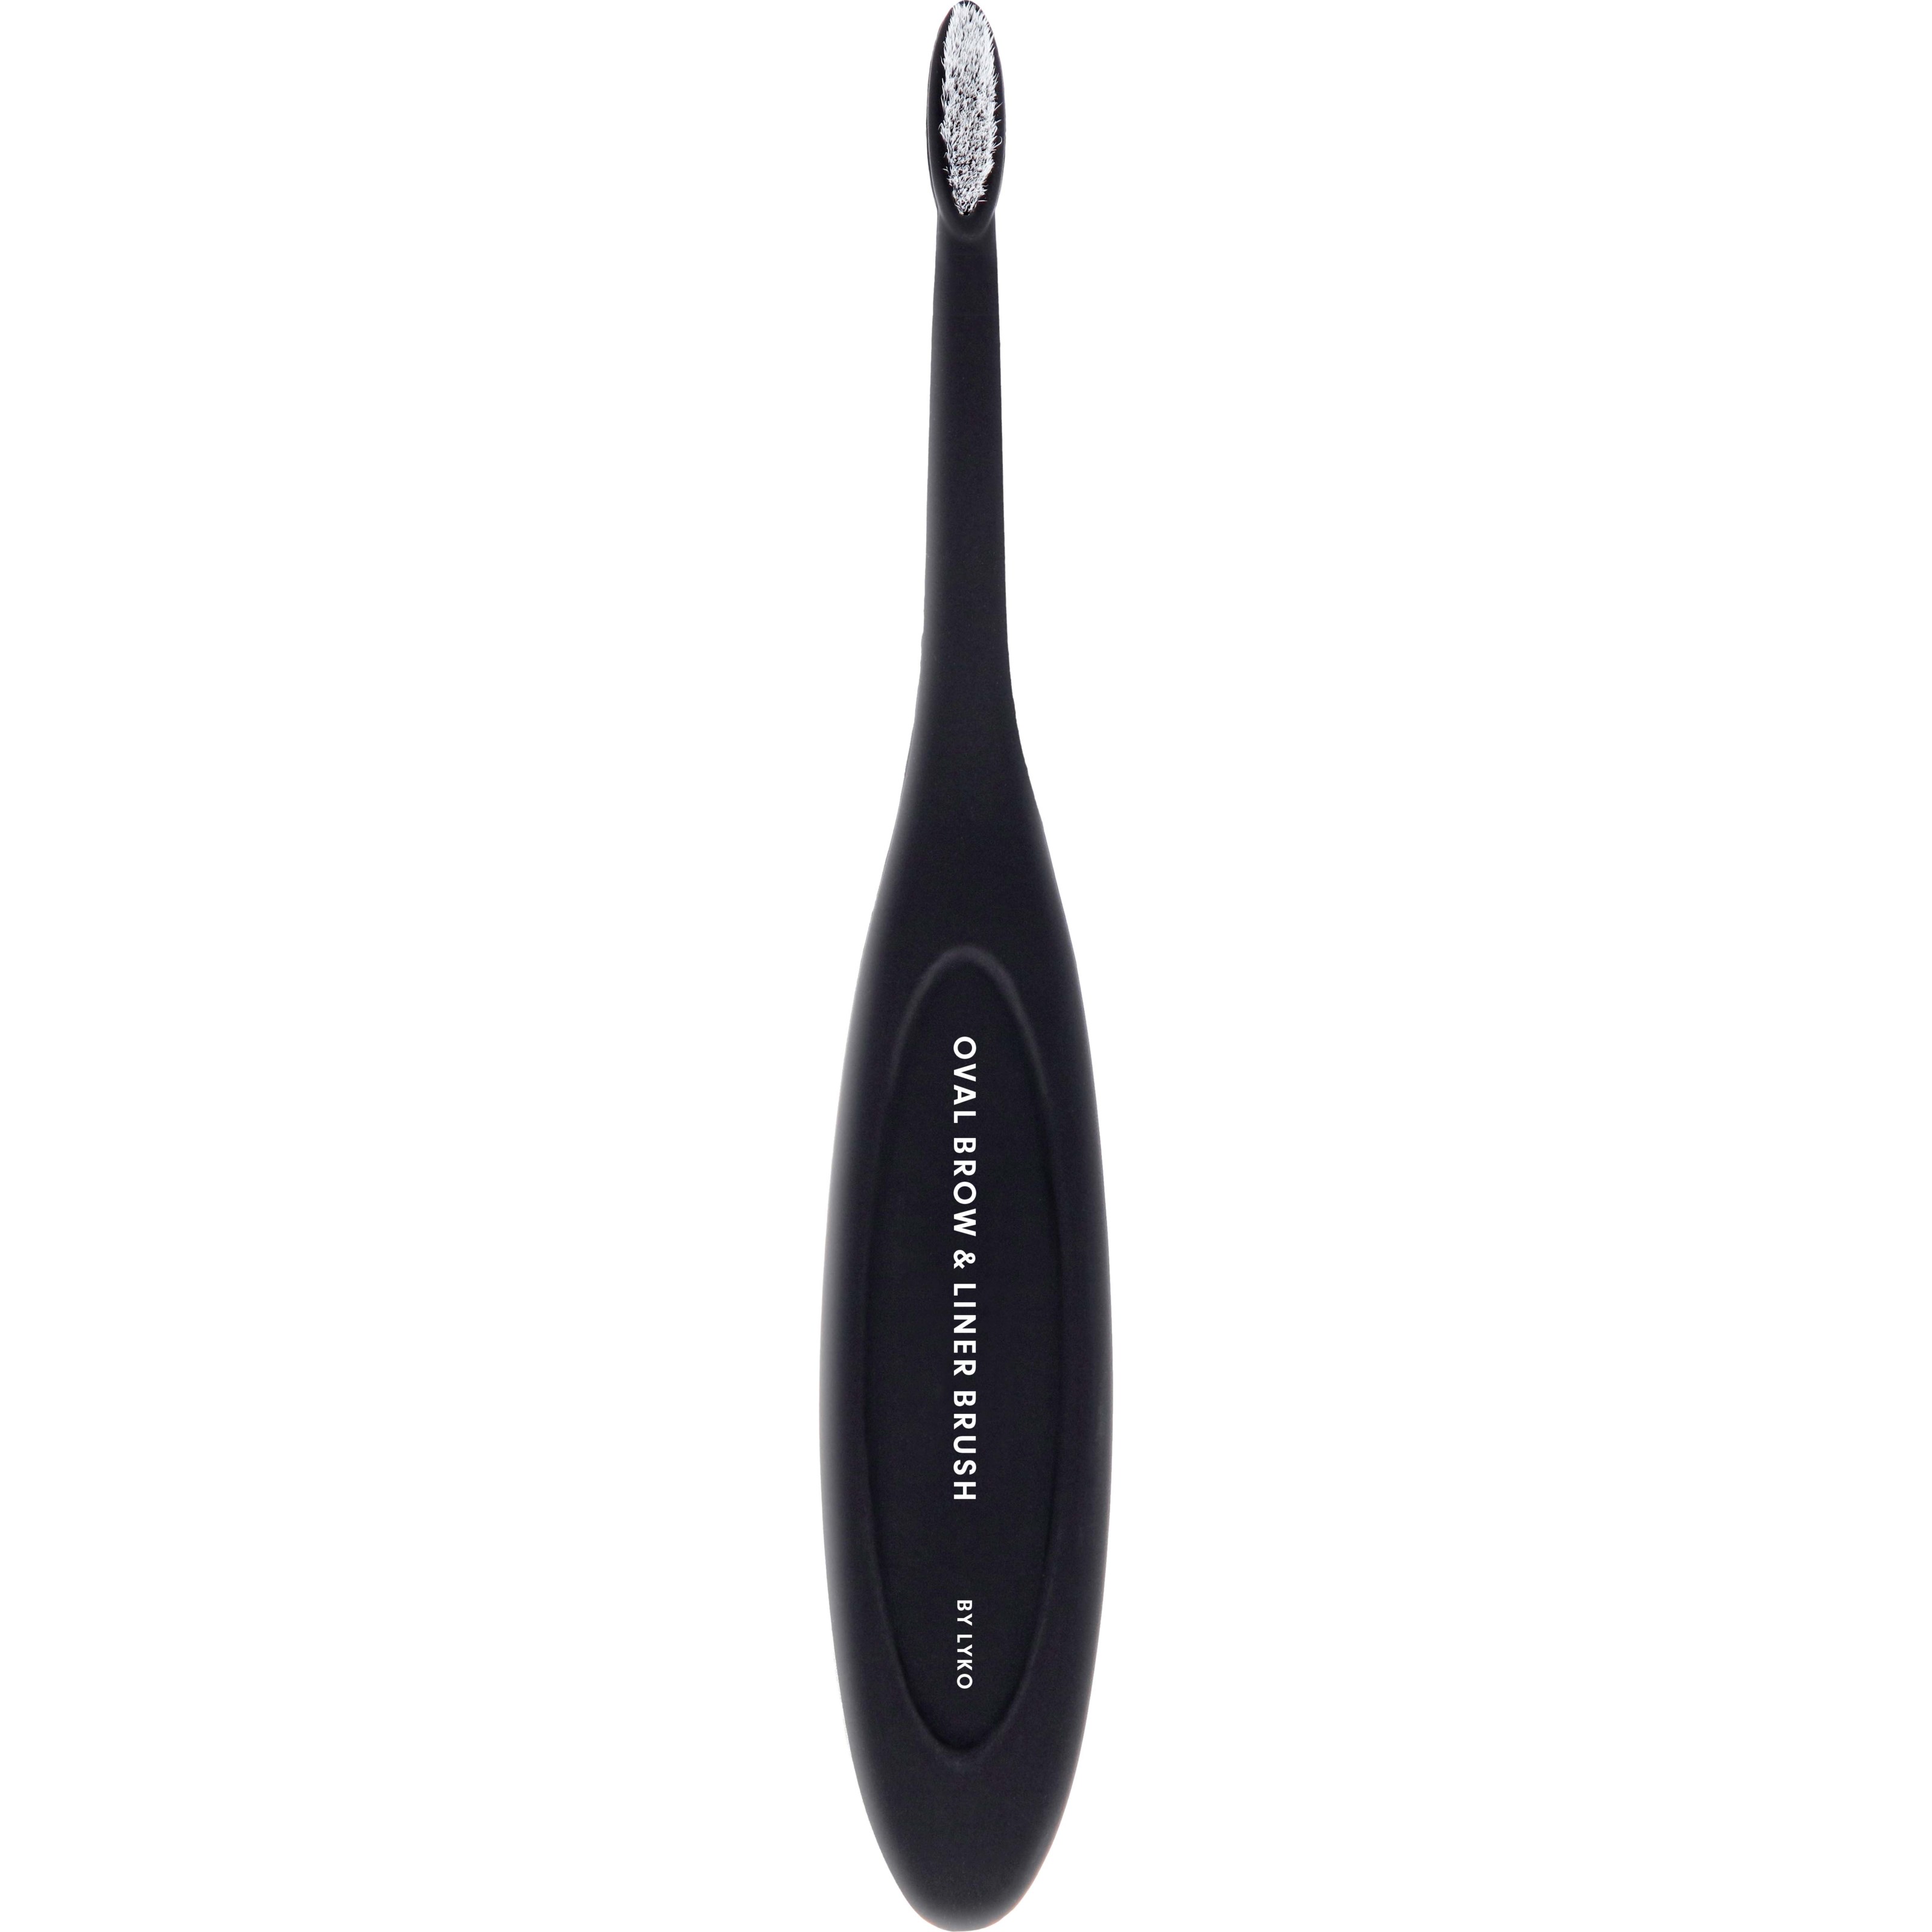 By Lyko Oval Brow & Line Brush